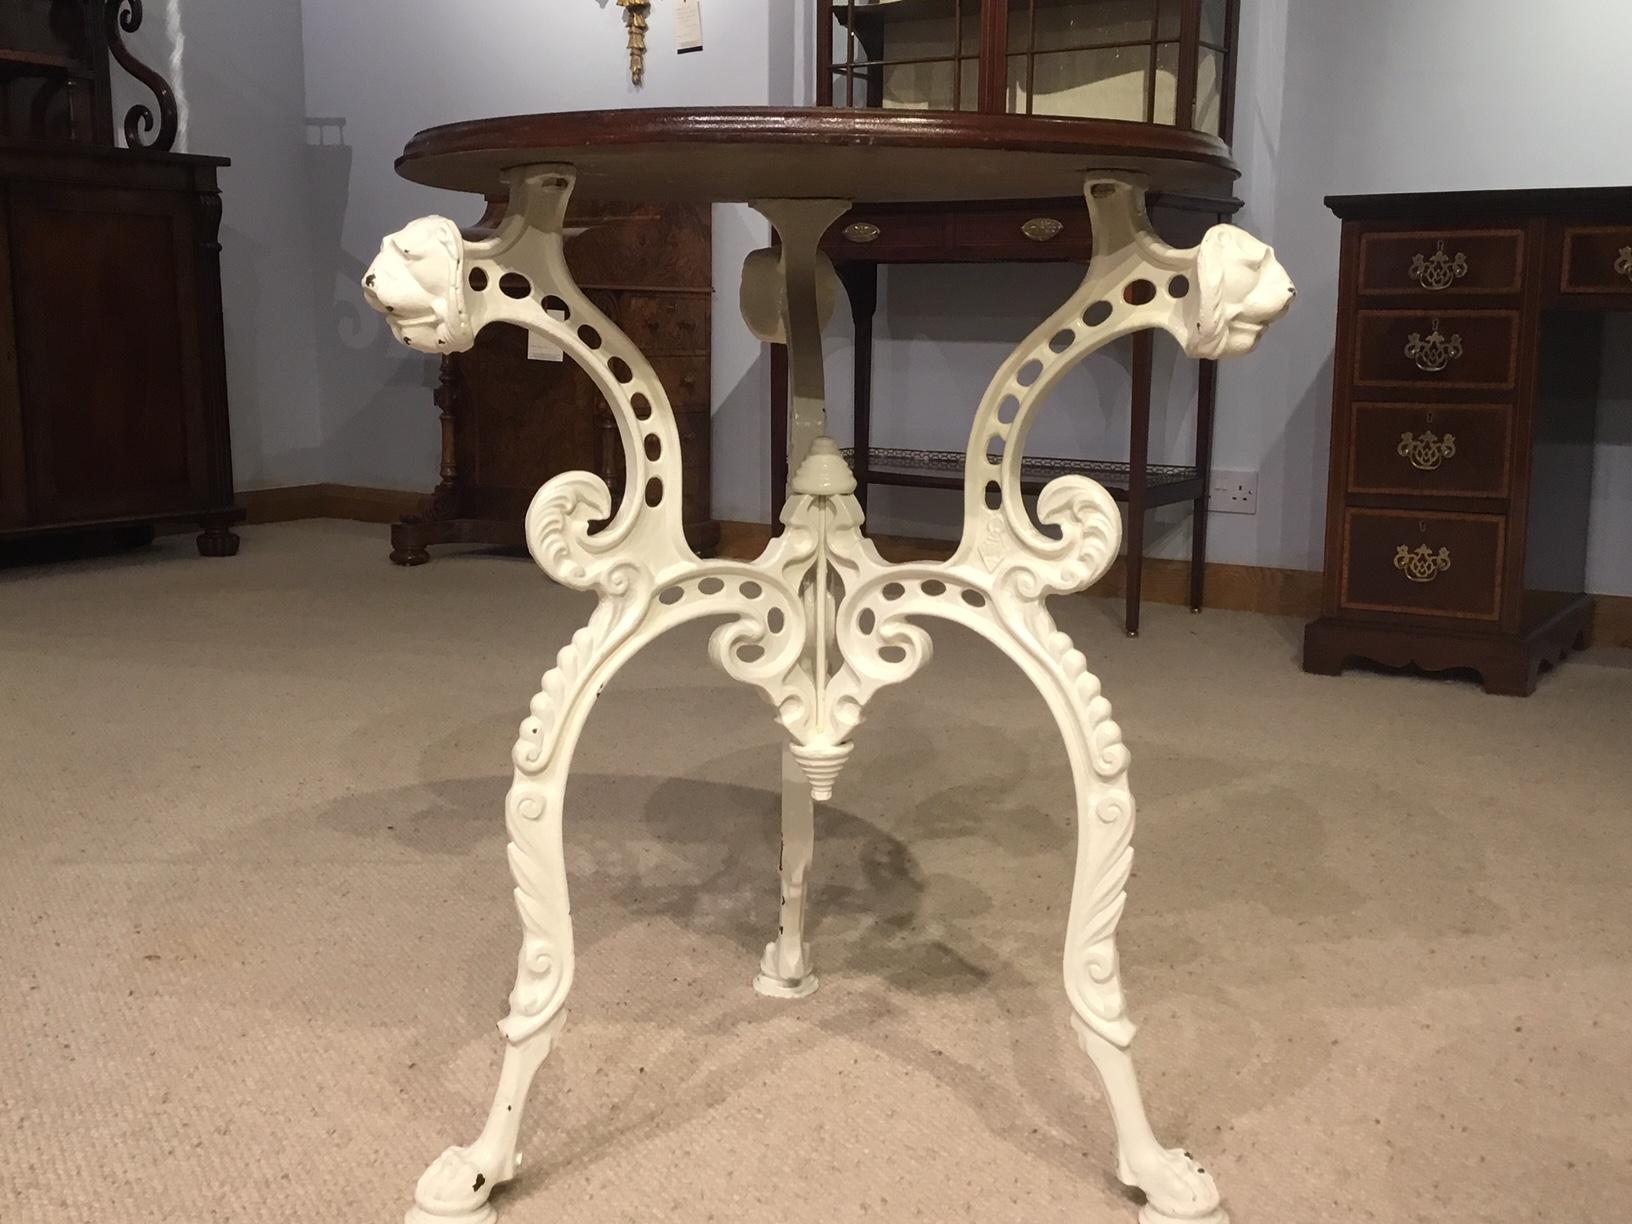 A mahogany and cast iron Victorian period pub table. Having a circular mahogany top supported on three elaborate cast iron supports with lions heads, acanthus cast detail and lions paw feet. Stamped with a Victorian kite number, possibly made by